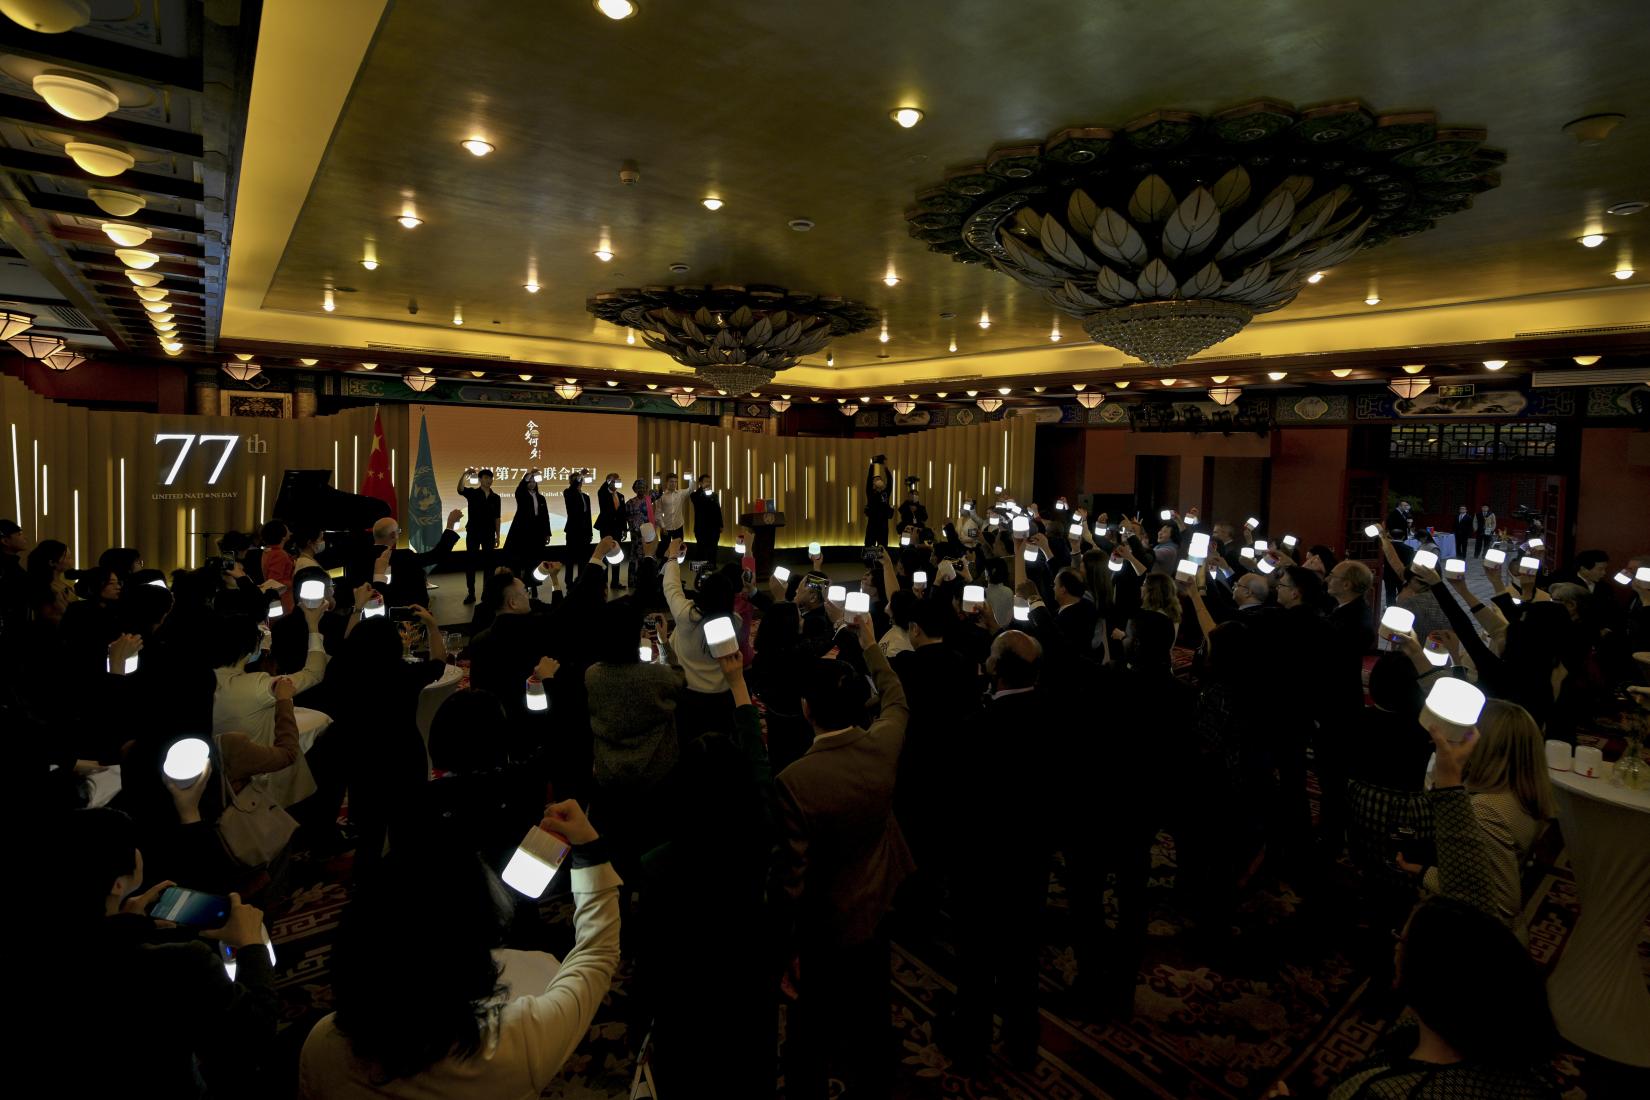 Guests at UN Day ceremony raising a "beacon of hope"